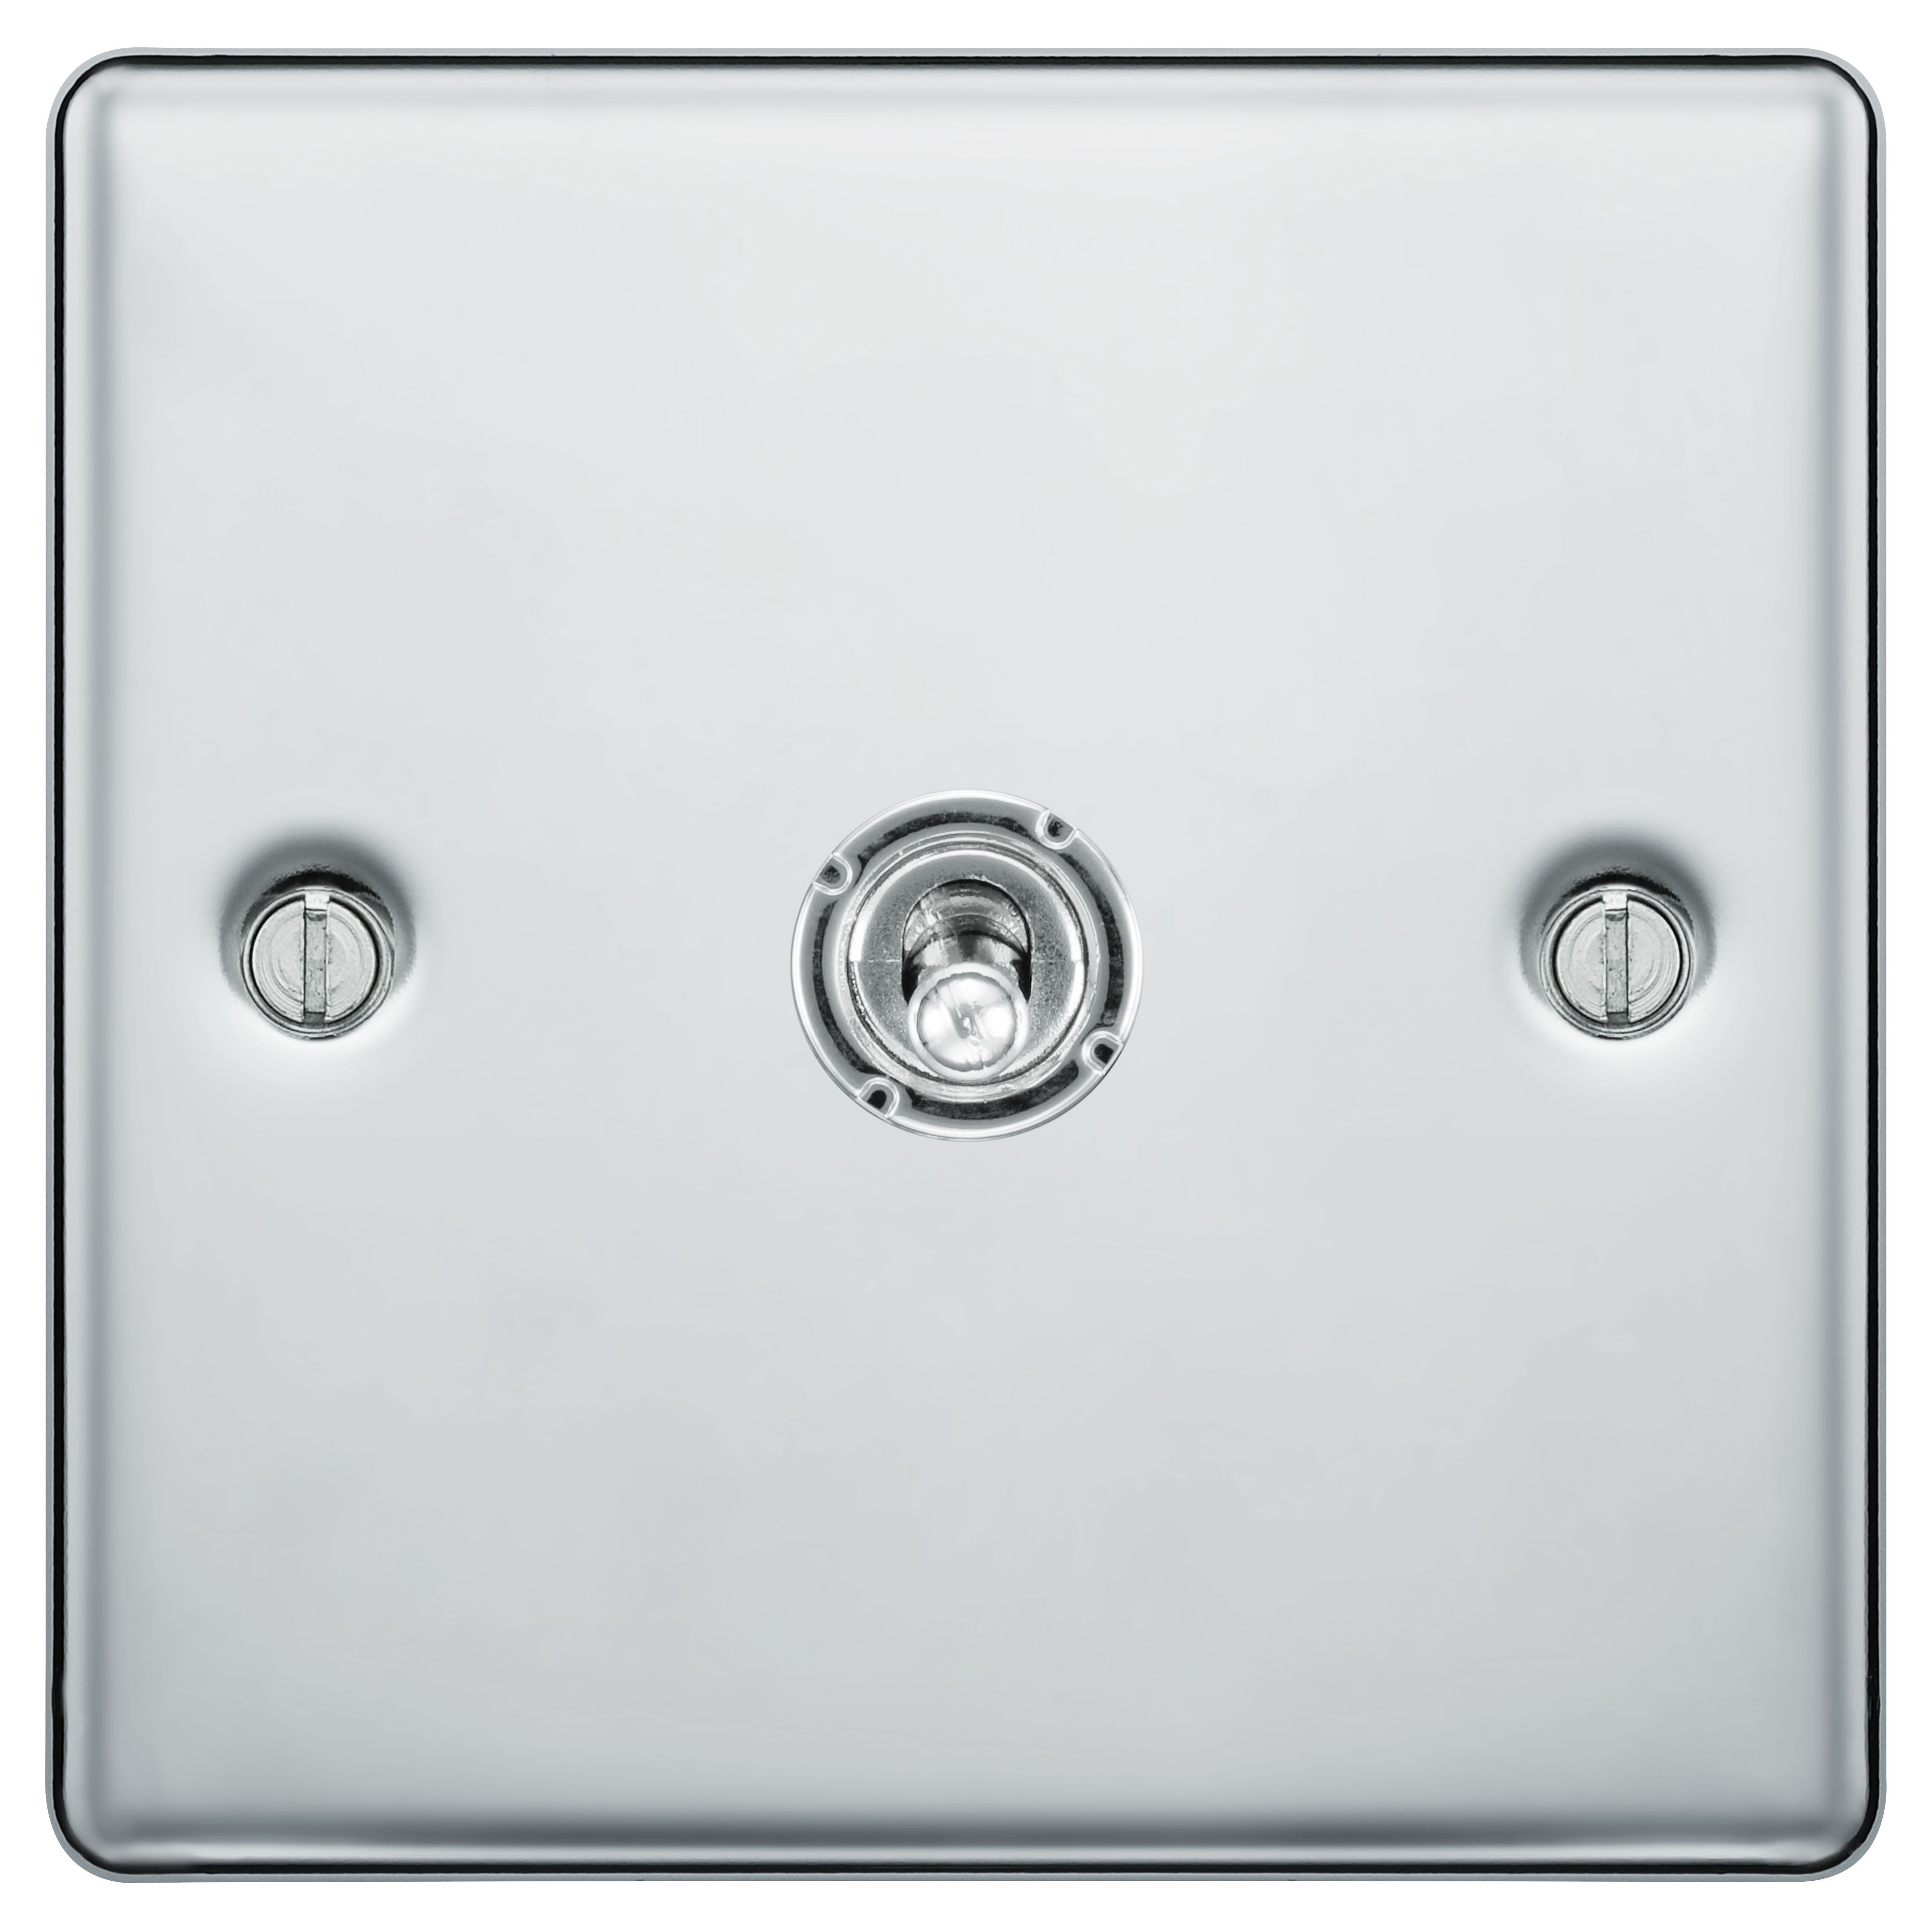 GoodHome 20A 2 way 1 gang Toggle switch Gloss Chrome effect